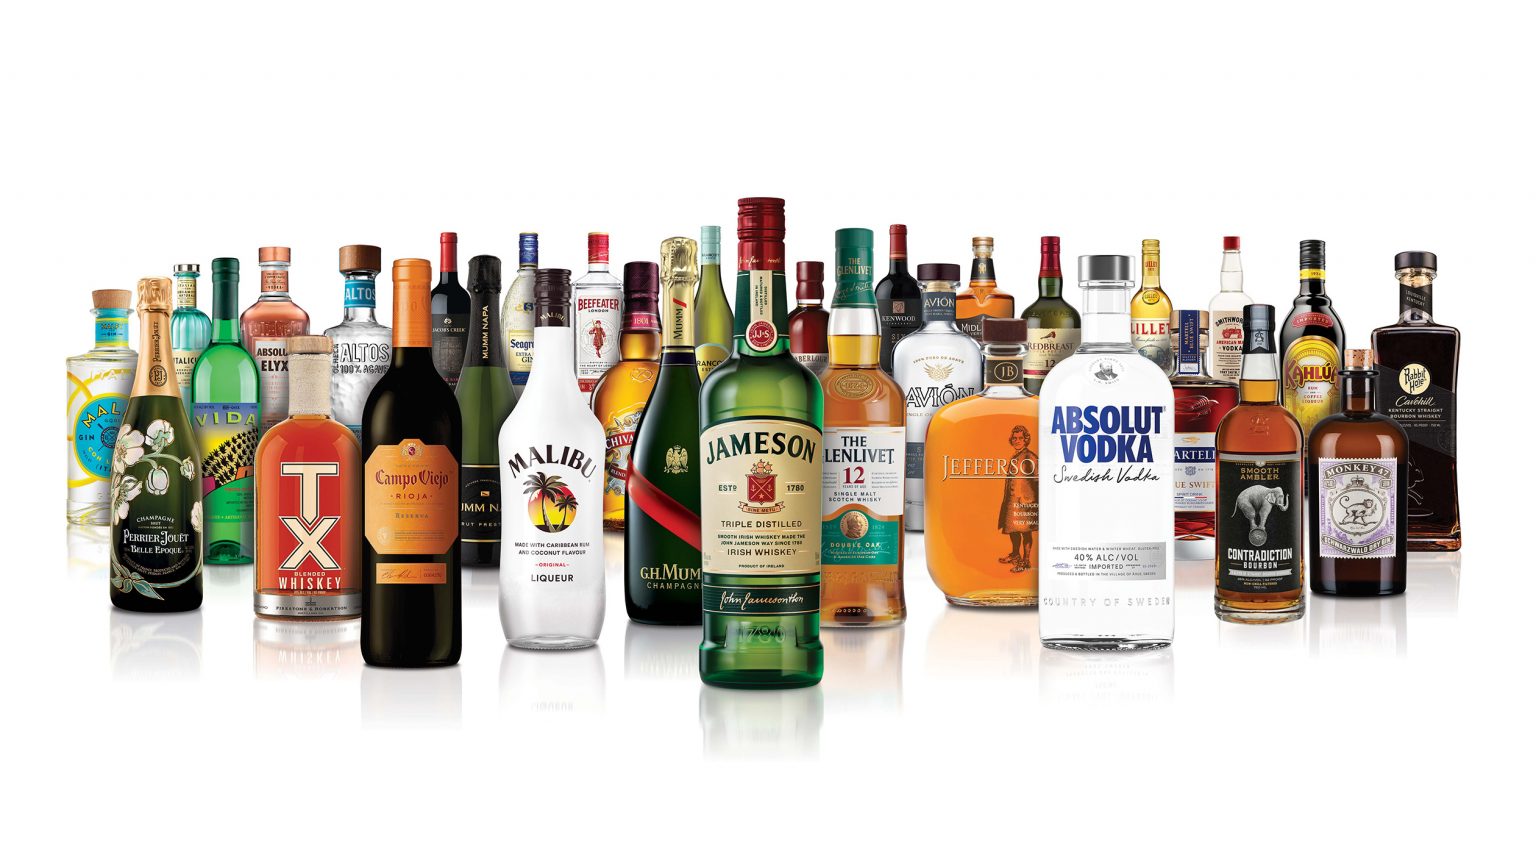 Pernod Ricard owns more than 240 brands known for its world-renowned brands including Absolut, Chivas, Jameson, Mumm, Martell Ballentine’s, Jameson, Malfi and many others  